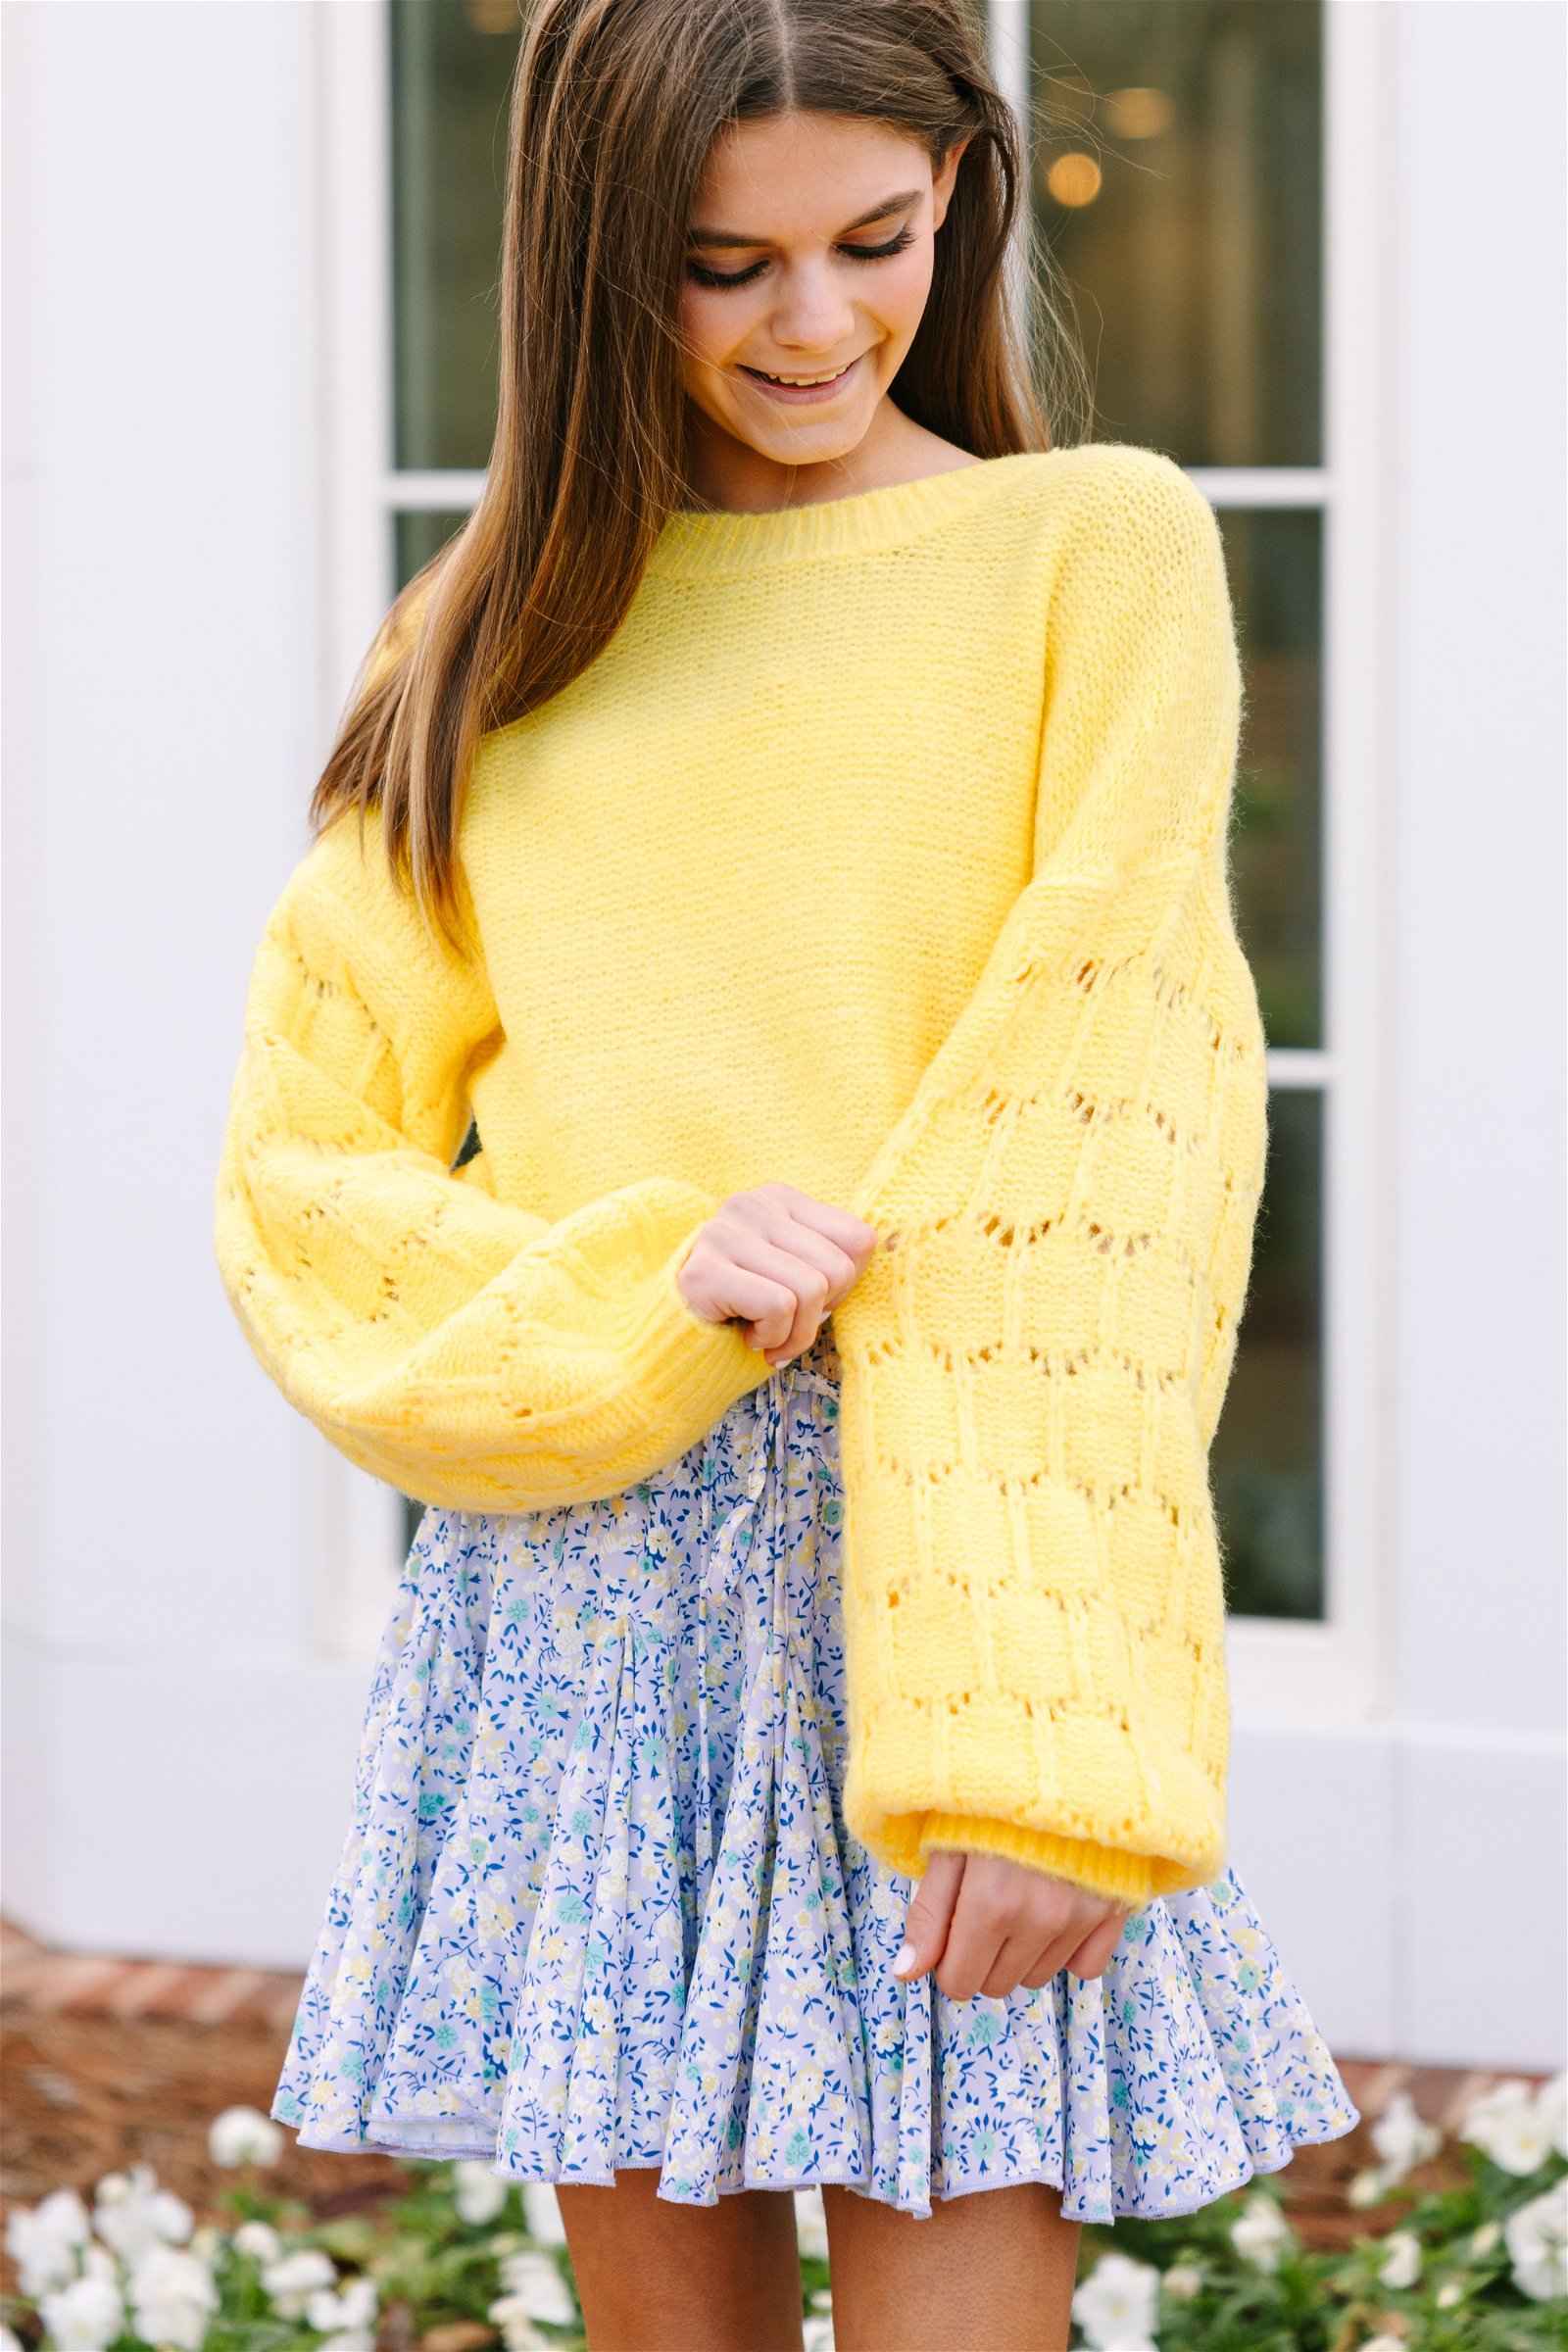 Girls: Feeling Close To You Yellow Textured Sweater Success